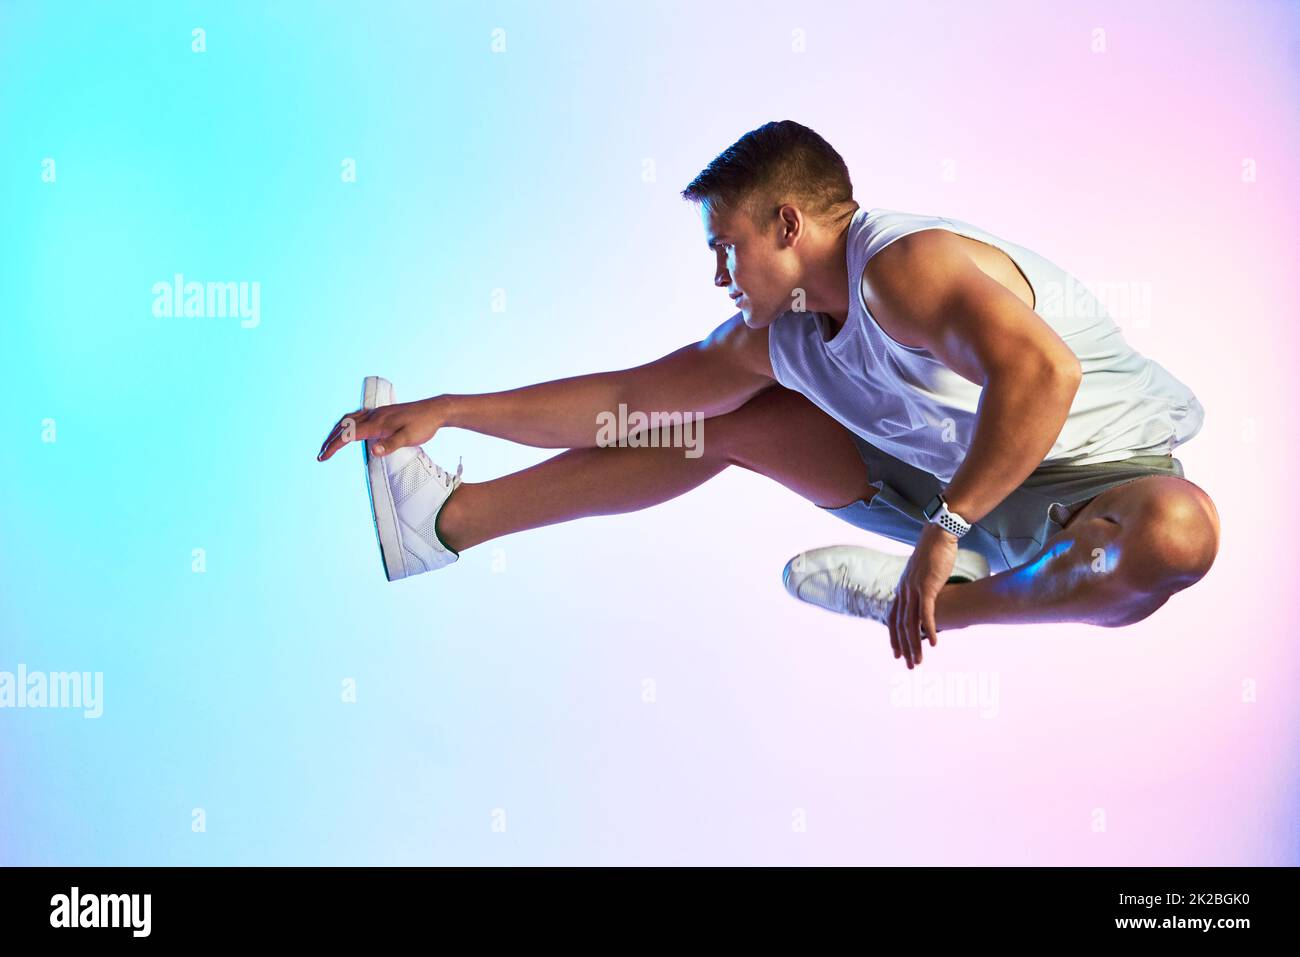 Reaching new heights. Studio shot of a handsome young male athlete jumping against a multi-coloured background. Stock Photo